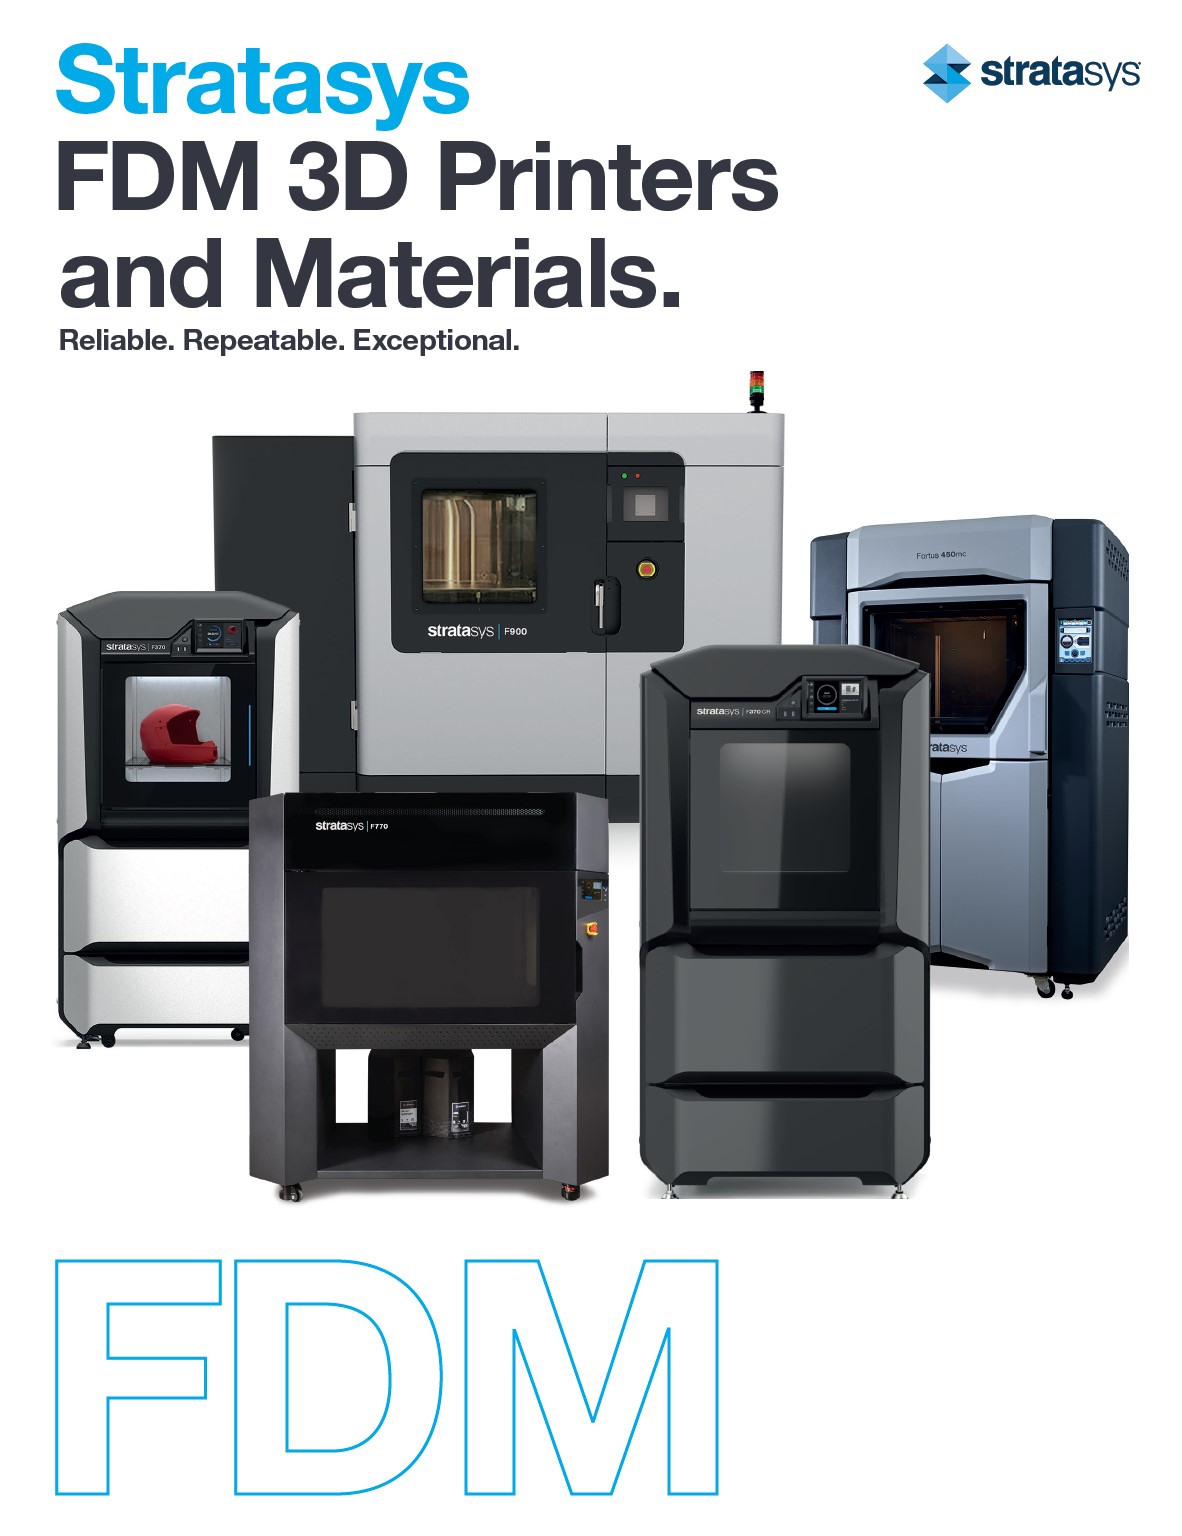 Overview of Stratasys FDM Materials